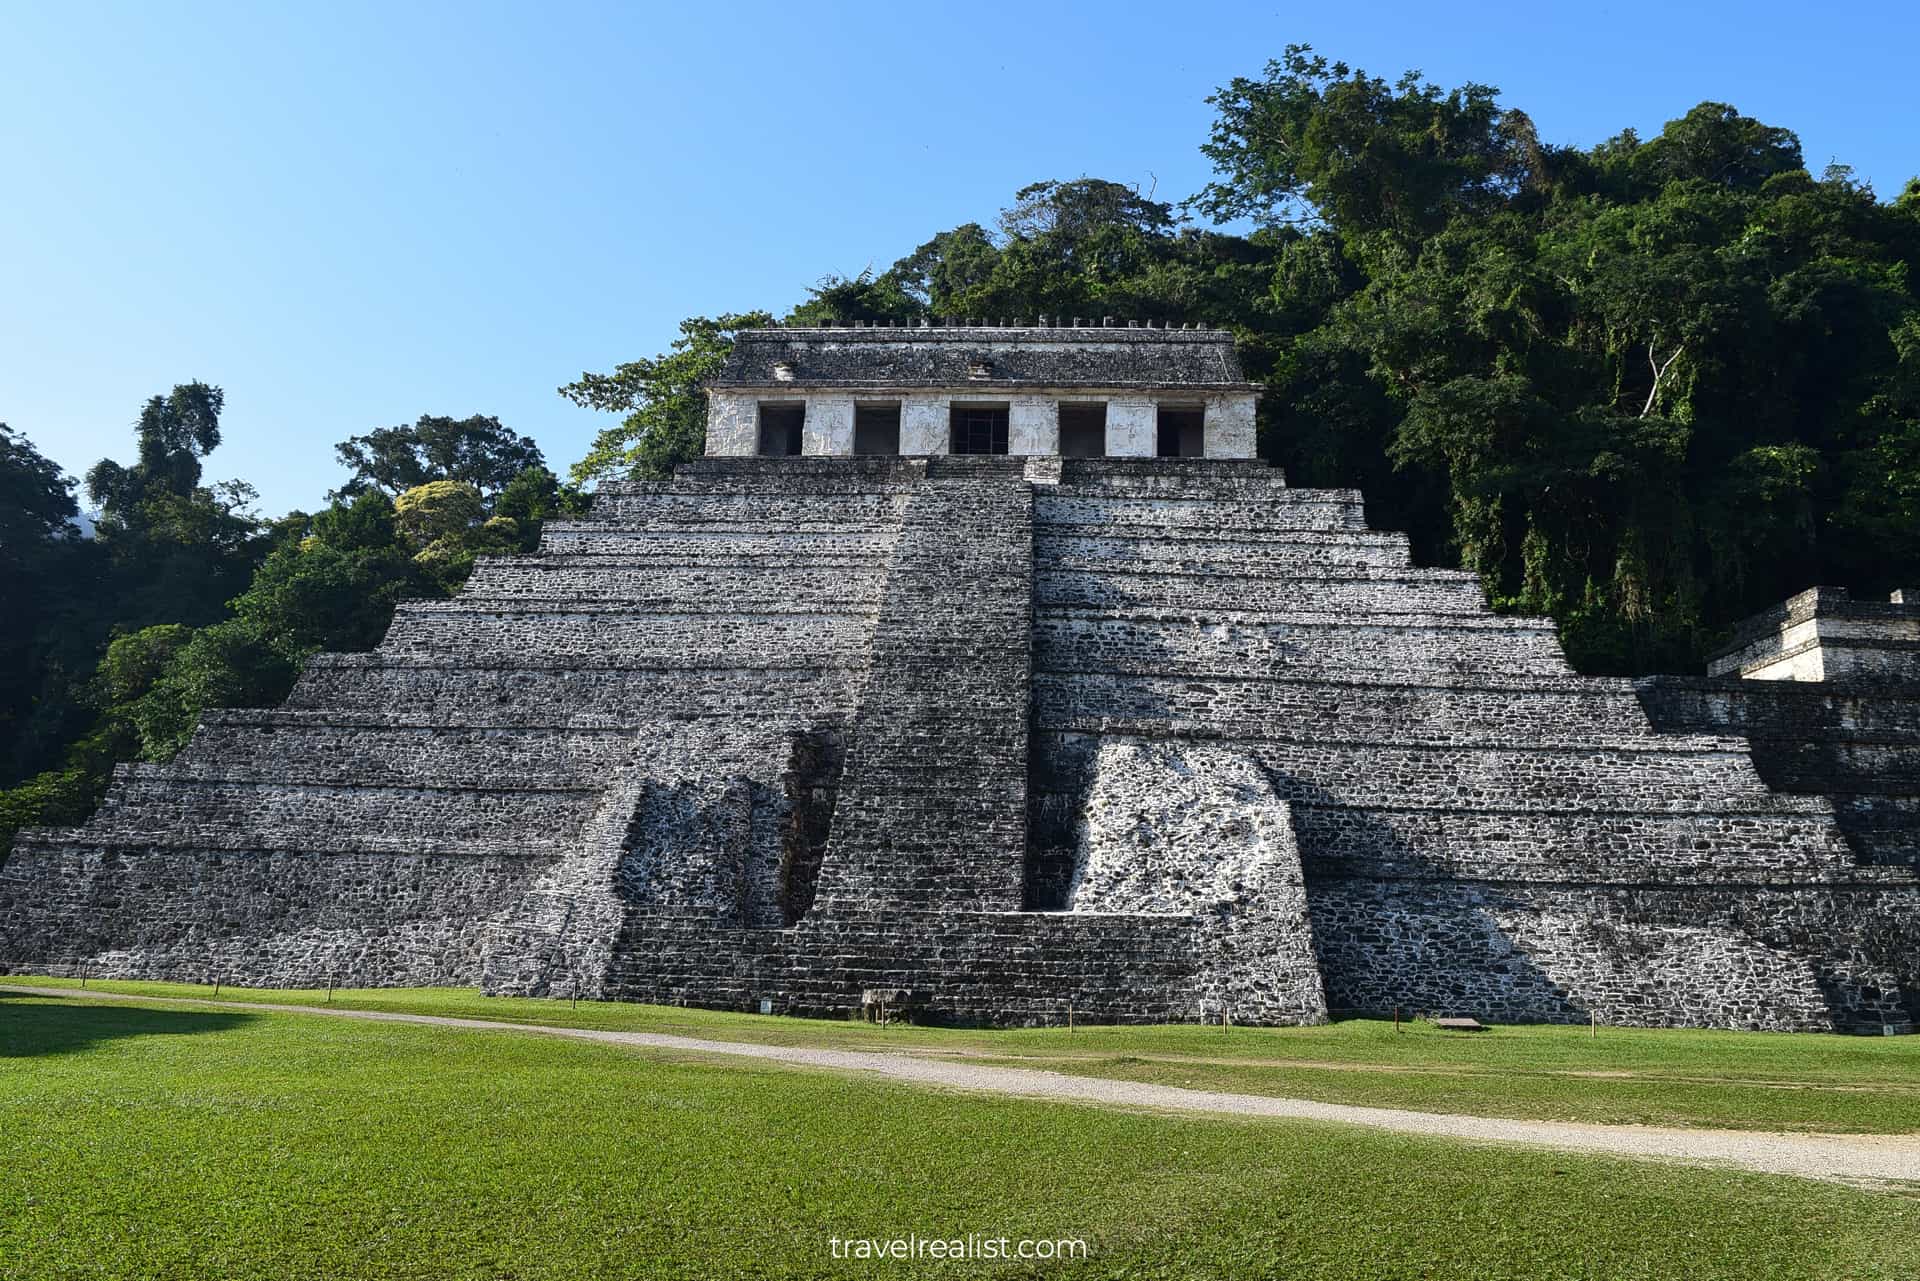 Temple of Inscriptions in Palenque, Mexico